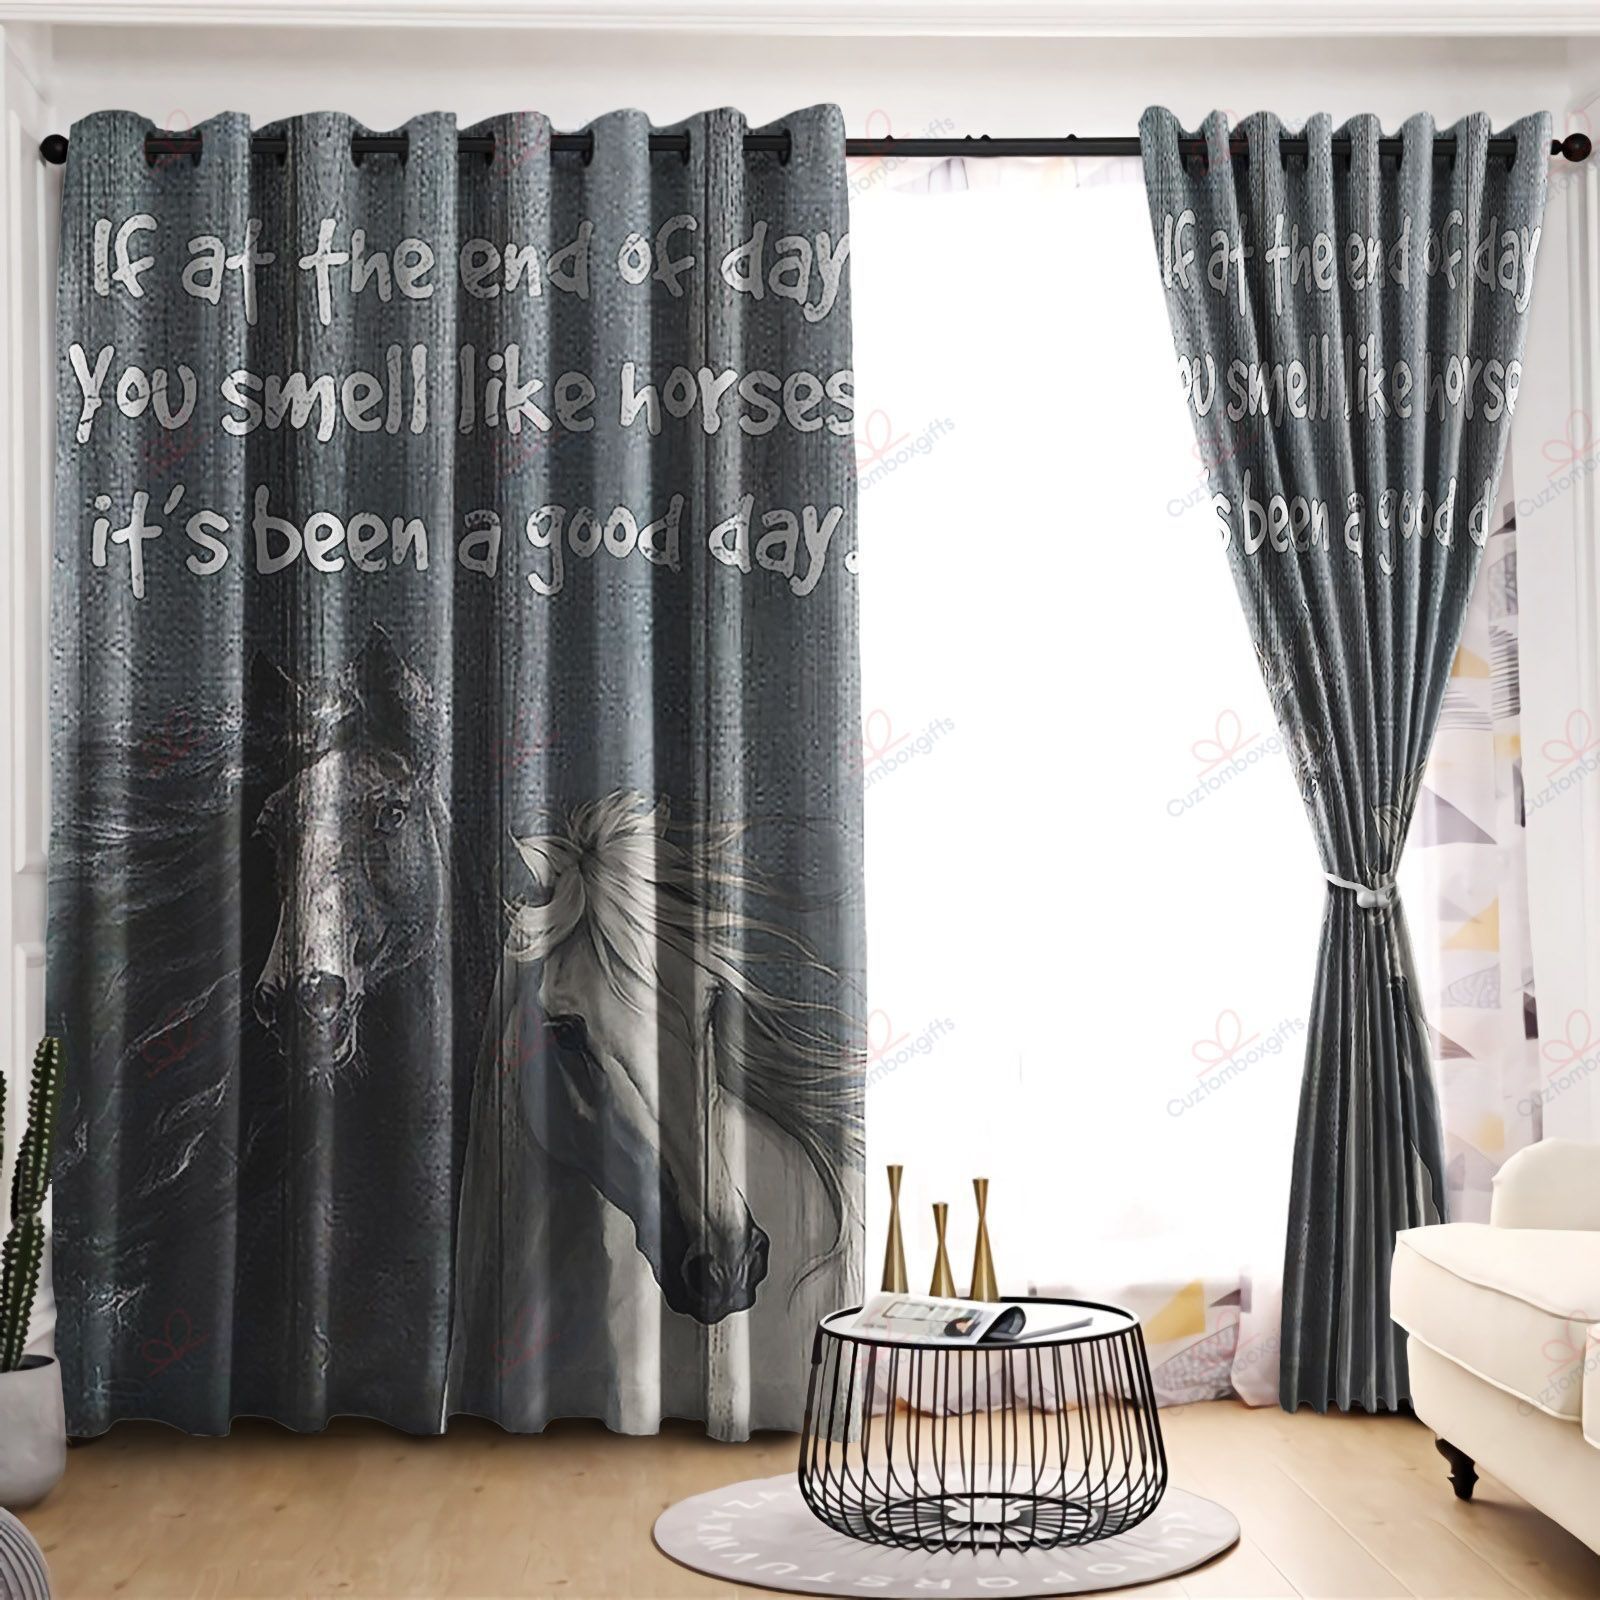 You Smell Like Horses It A Good Day Printed Window Curtain Home Decor